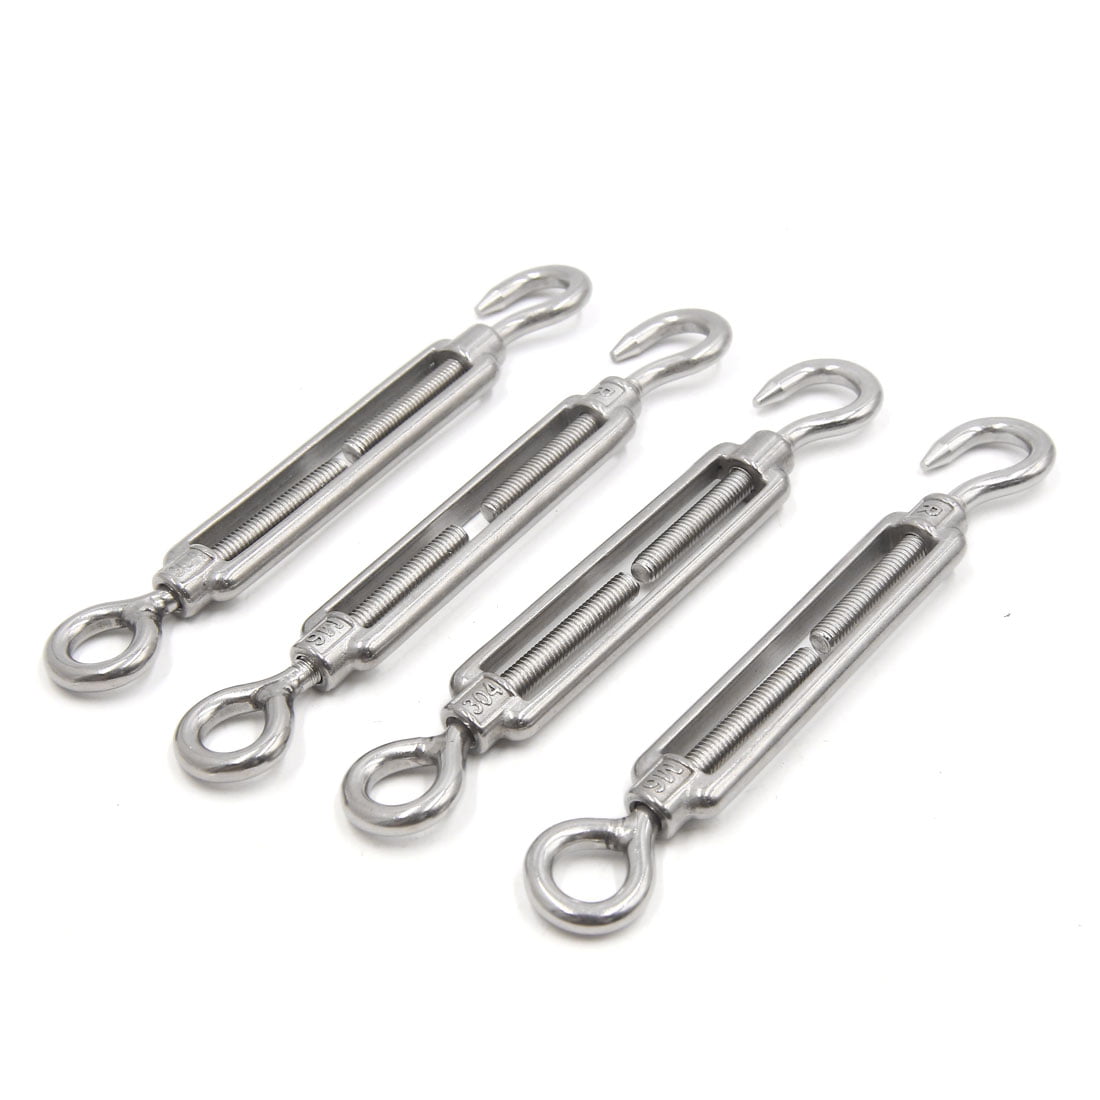 304 Stainless Steel Turnbuckle Heavy Duty Wire Rope Tension 5 Pcs M6 Eye & Eye Turnbuckle 